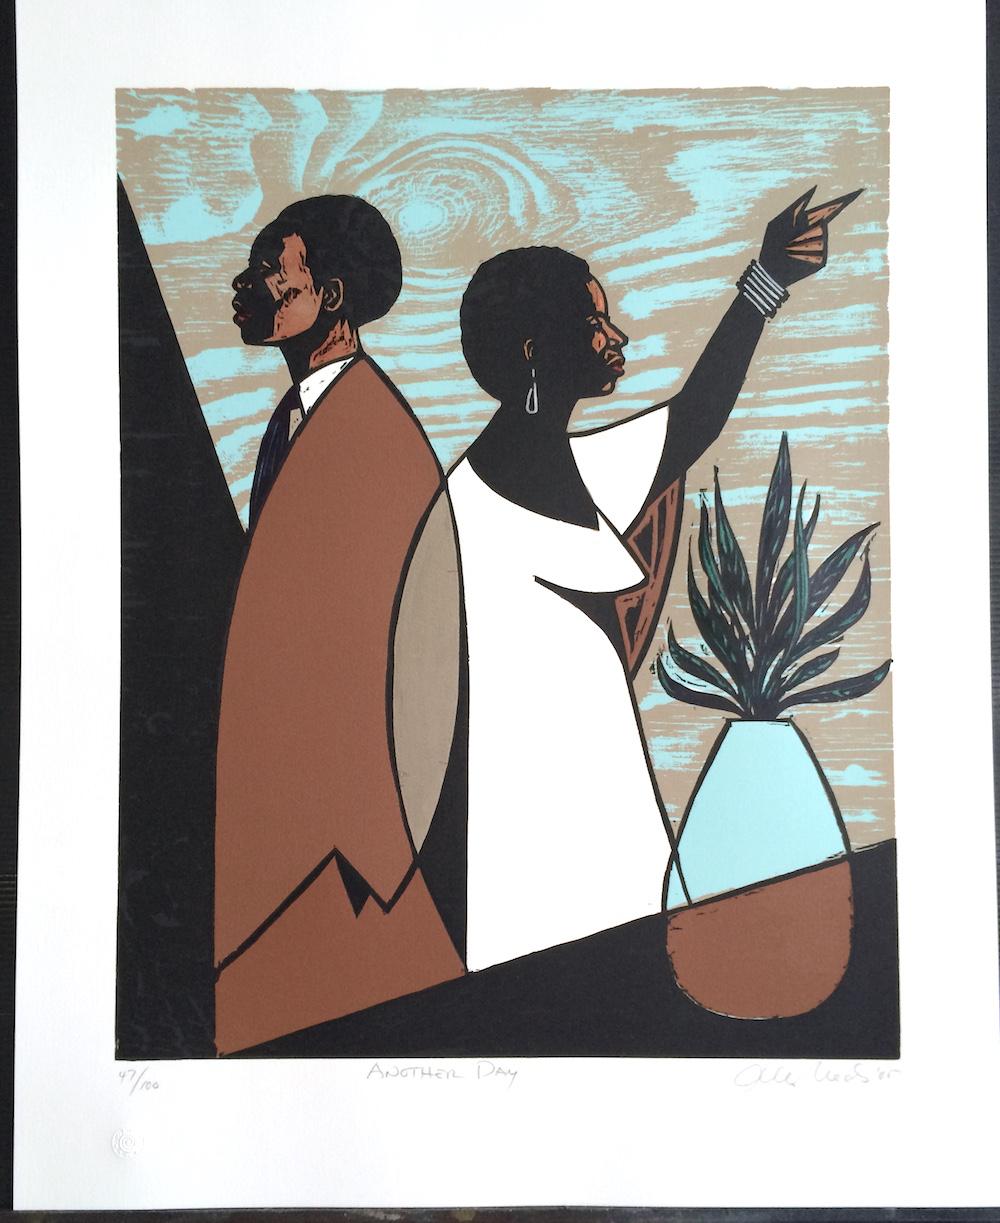 ANOTHER DAY is an original limited edition woodcut and screen print by the American painter and sculptor, Otto Neals. The woodblock used to print ANOTHER DAY was hand-carved by Otto Neals and printed in shades of brown, light blue, beige, and black